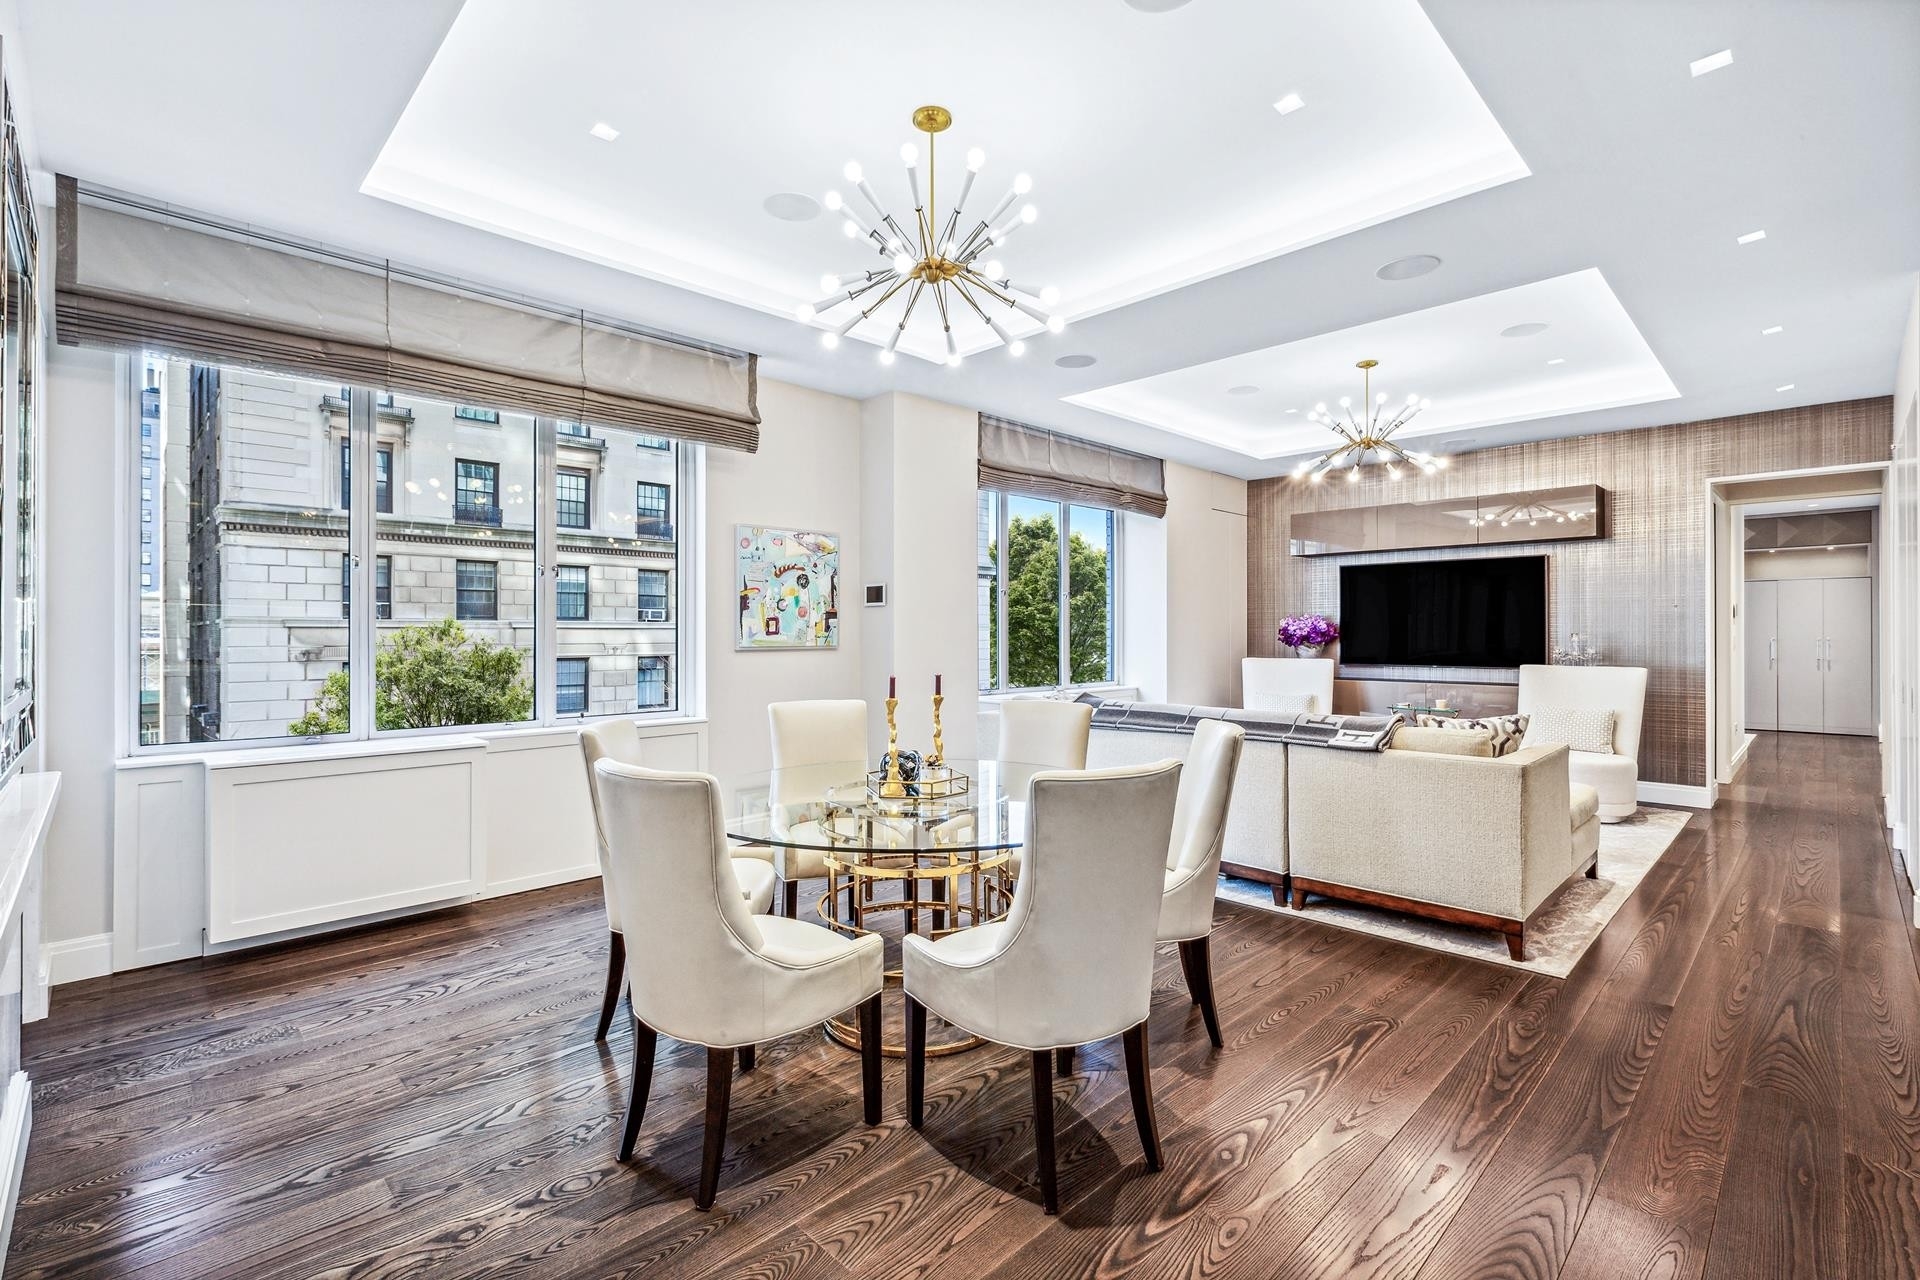 Co-op Properties for Sale at 910 FIFTH AVE, 4C Lenox Hill, New York, NY 10021